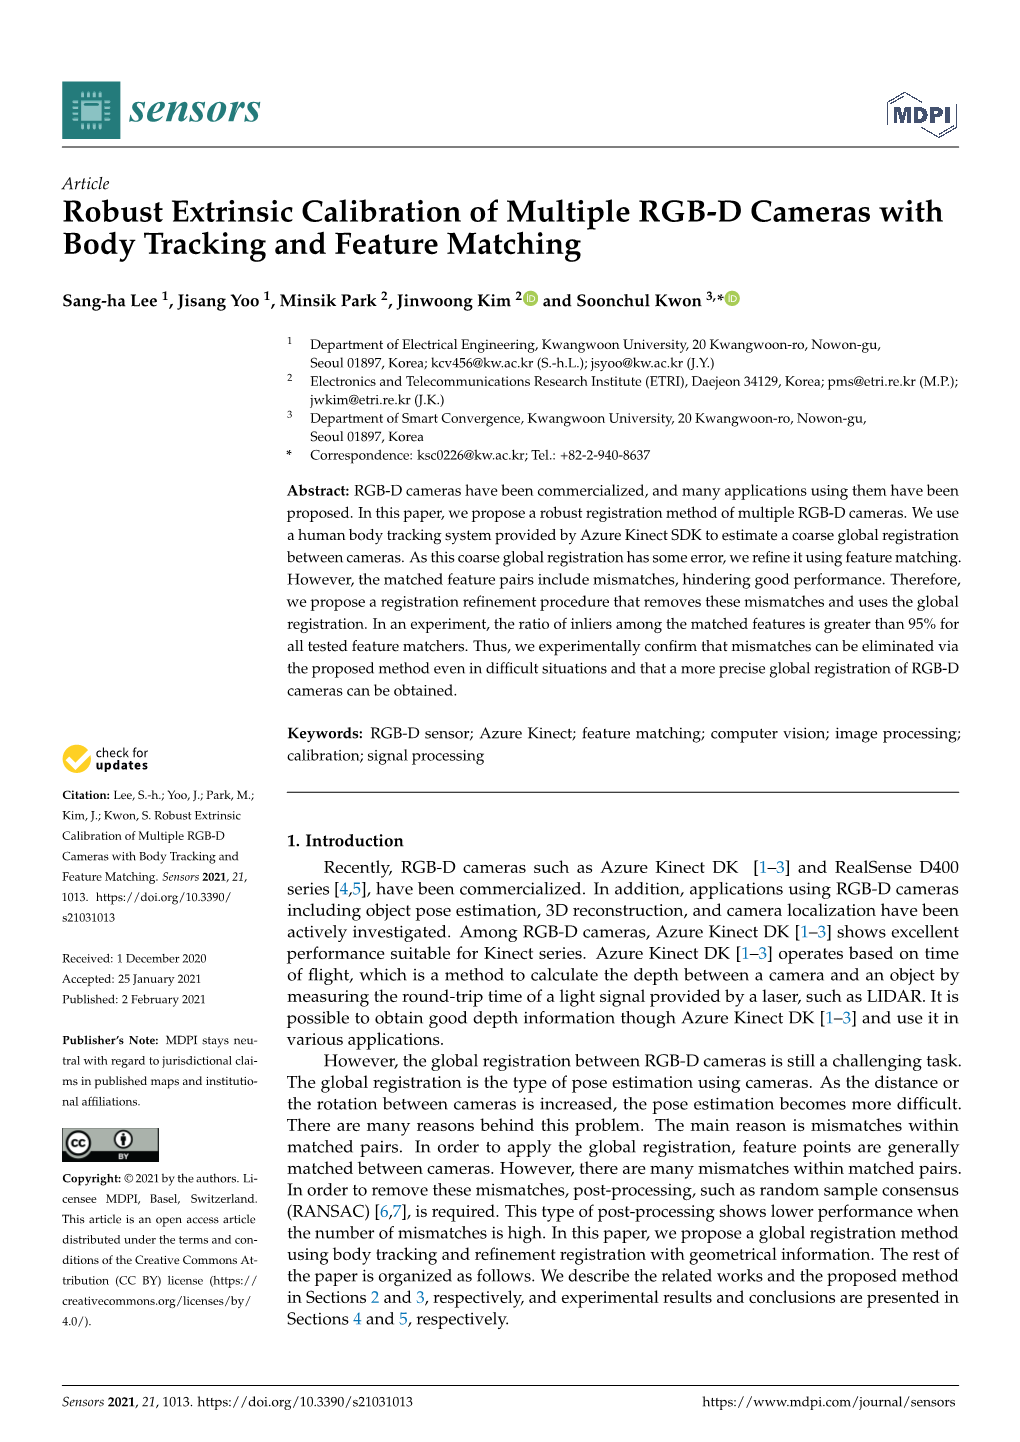 Robust Extrinsic Calibration of Multiple RGB-D Cameras with Body Tracking and Feature Matching